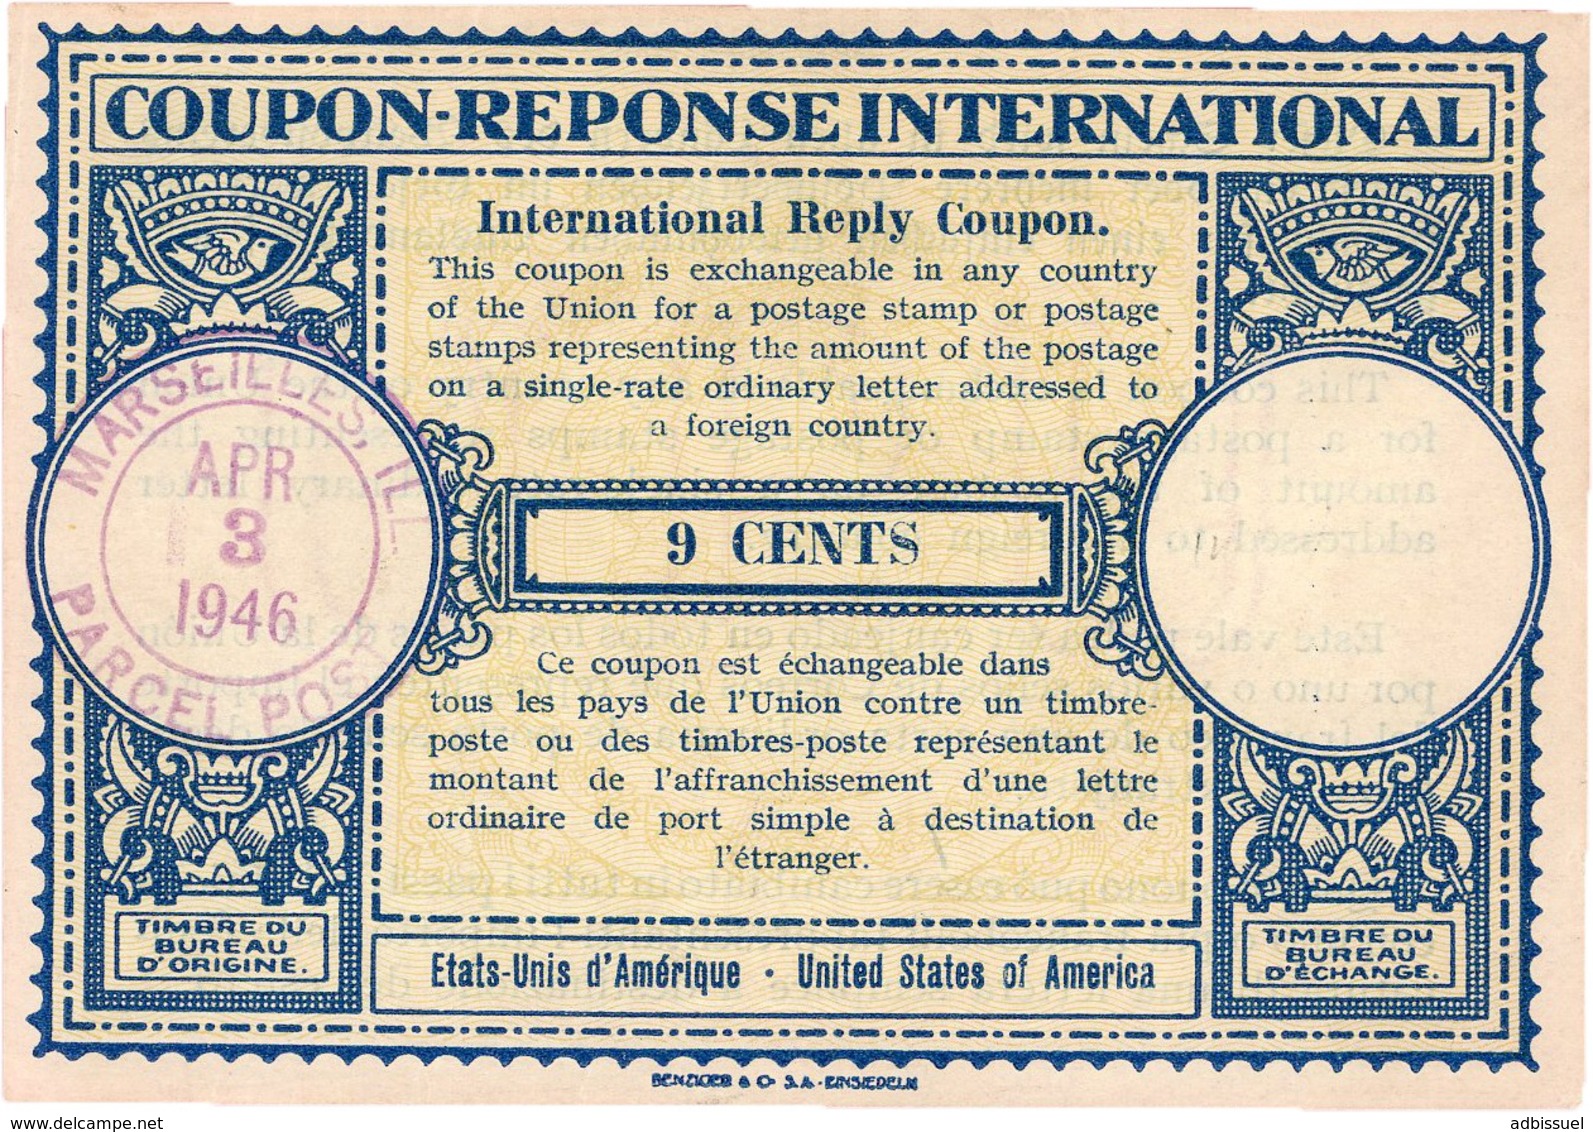 COUPON-REPONSE INTERNATIONAL USA Type Londres Obliteration Lilas "MARSEILLES ILL. PARCEL POST 3/4/46" / 9 Cents. TB - Antwoordbons